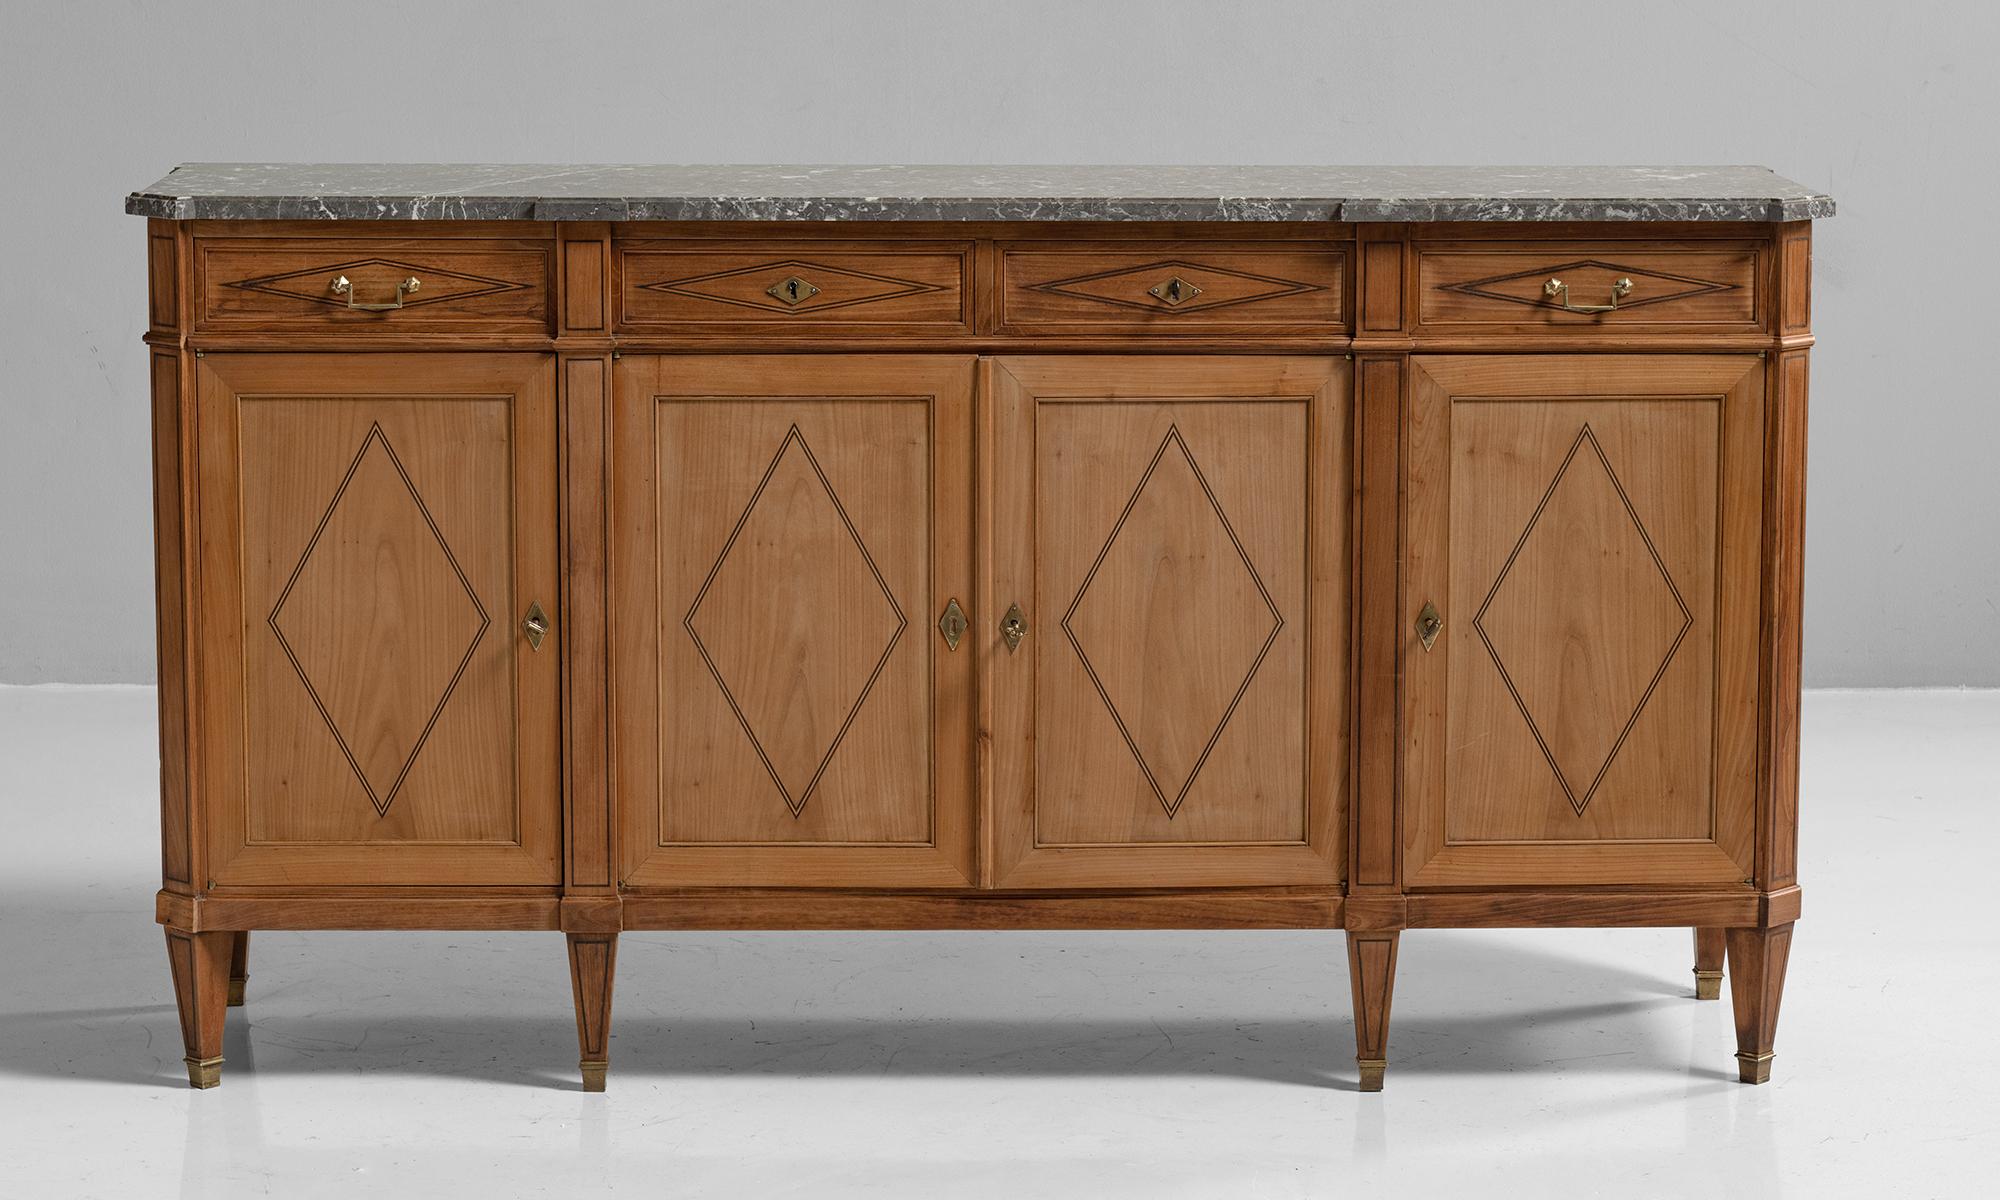 Marble top enfilade

France circa 1880

Breakfront buffet with four doors and drawers, retaining original marble top.